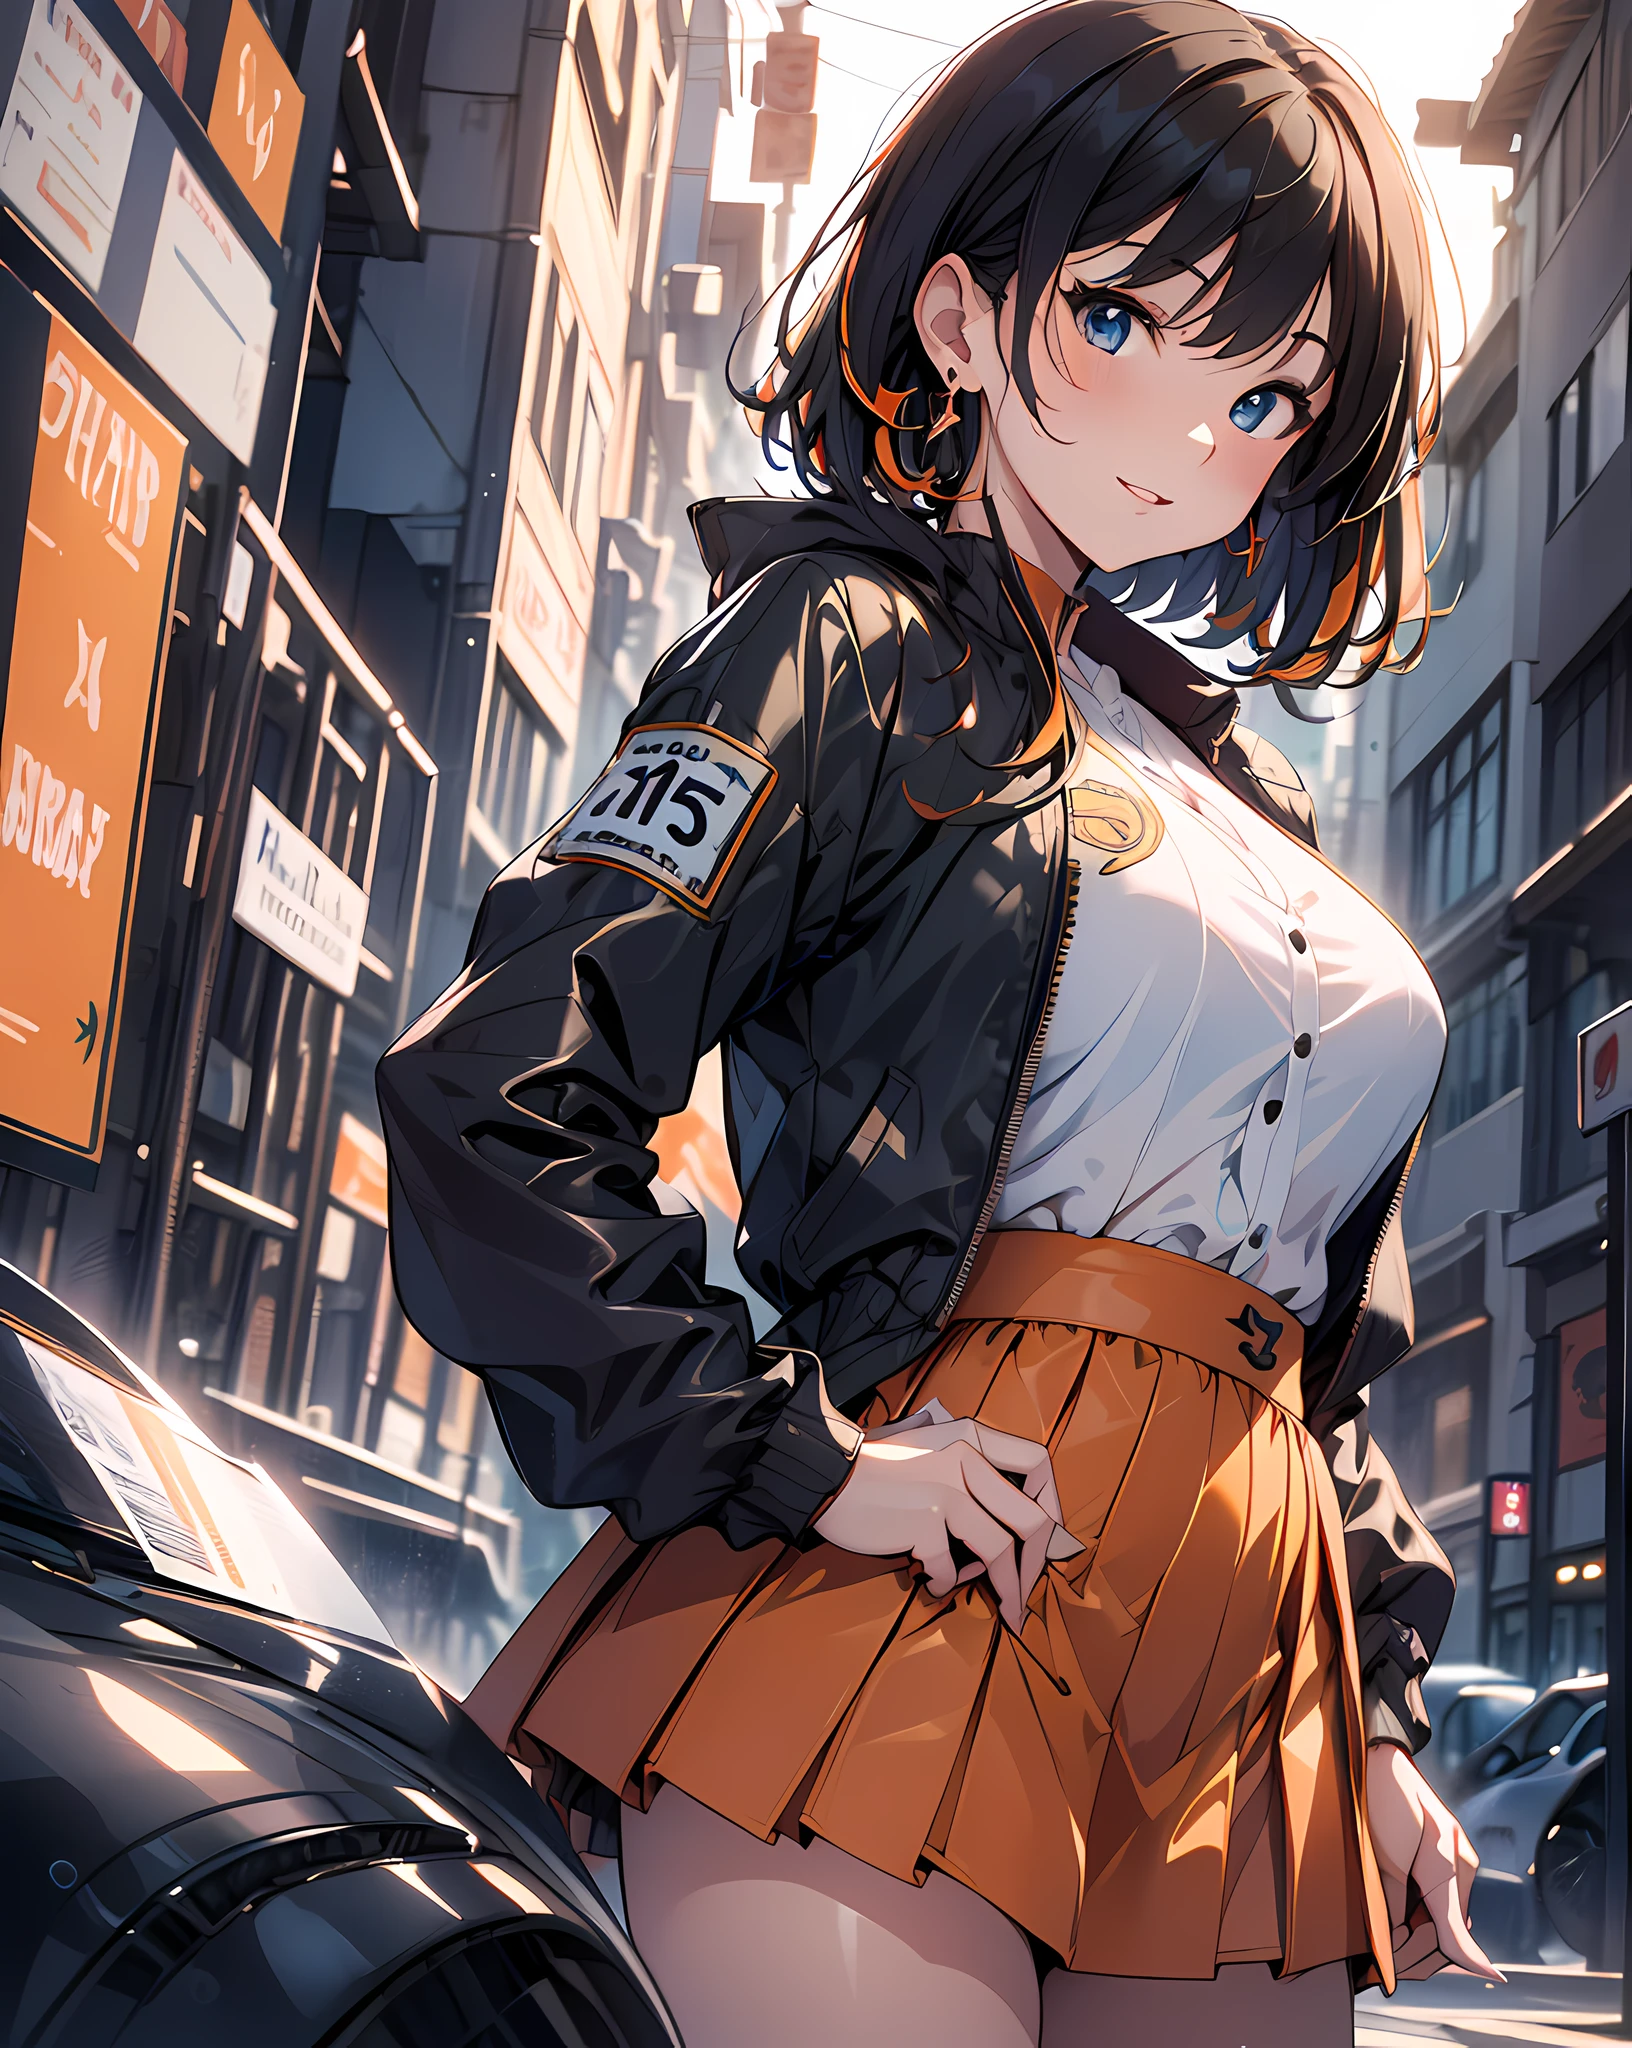 (masterpiece, best quality:1.37), highres, ultra-detailed, ultra-sharp, BREAK, Japanese school girl model, 1girl, (beautiful anime face, cute face, detailed face), (black hair, short hair, bangs), blue eyes, jewelry, earrings, piercing, BREAK, ((detailed orange race queen costume:1.5), (detailed rubber jacket and short skirt:1.3)), lovely look, detailed clothes), light smile, closed mouth, parted lips, pink lipstick, BREAK, standing, arms behind on hip, leaning forward, cowboy shot, detailed human hands, HDTV:1.2, ((detailed car competition view background:1.3)), 8 life size, slender, anime style, anime style school girl, perfect anatomy, perfect proportion, inspiration from Kyoto animation and A-1 picture, late evening, excellent lighting, bright colors, clean lines, photorealistic